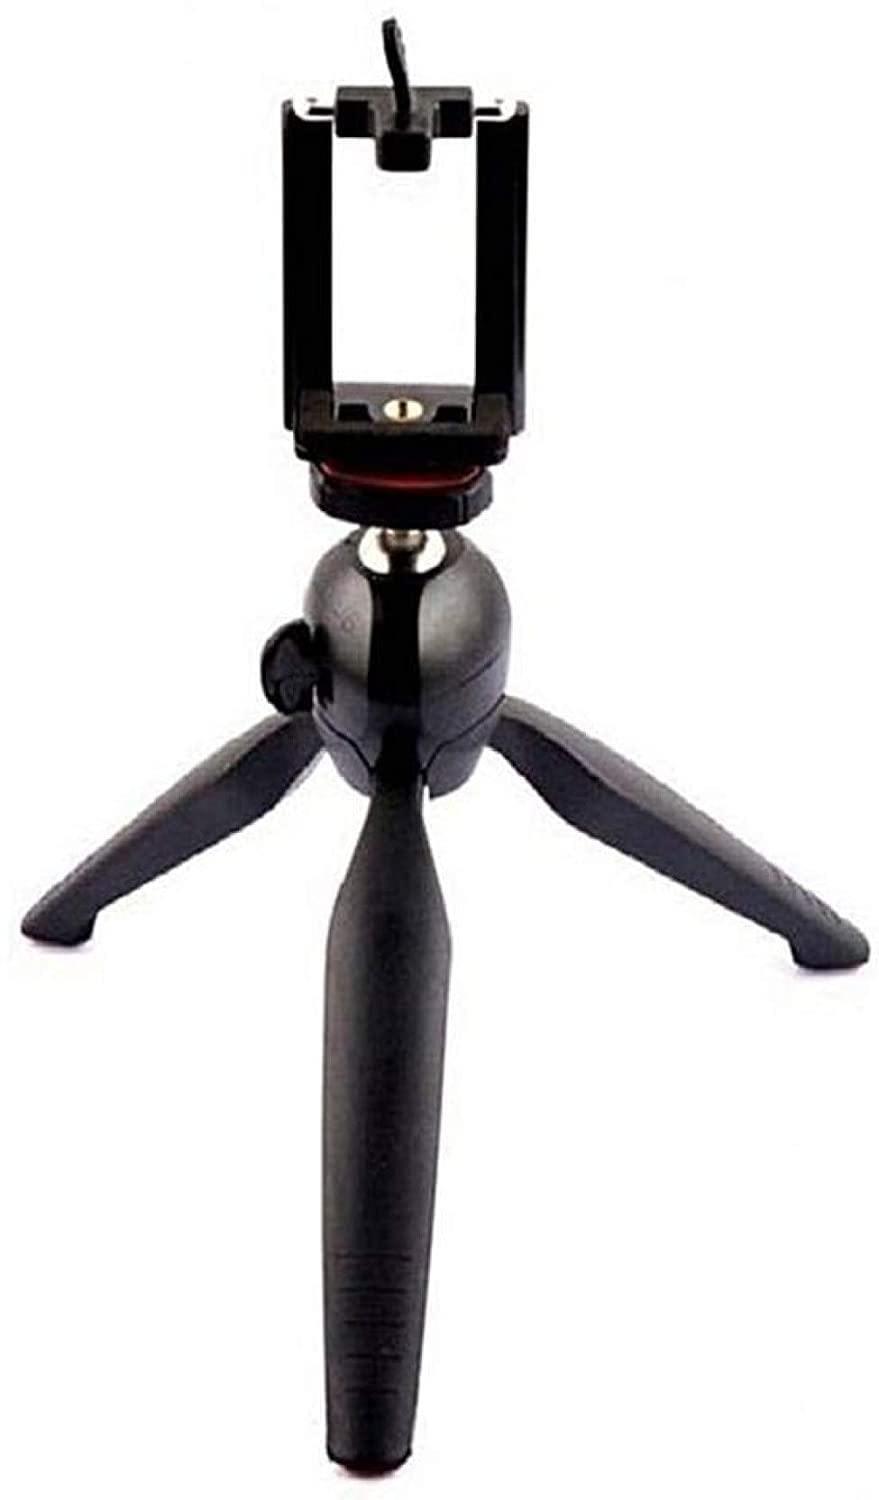 Dealsplant YT-228 7-inch Mini Tripod with 360 Degree Rotating Ball Head for All Smartphones-Mobile Accessories-dealsplant